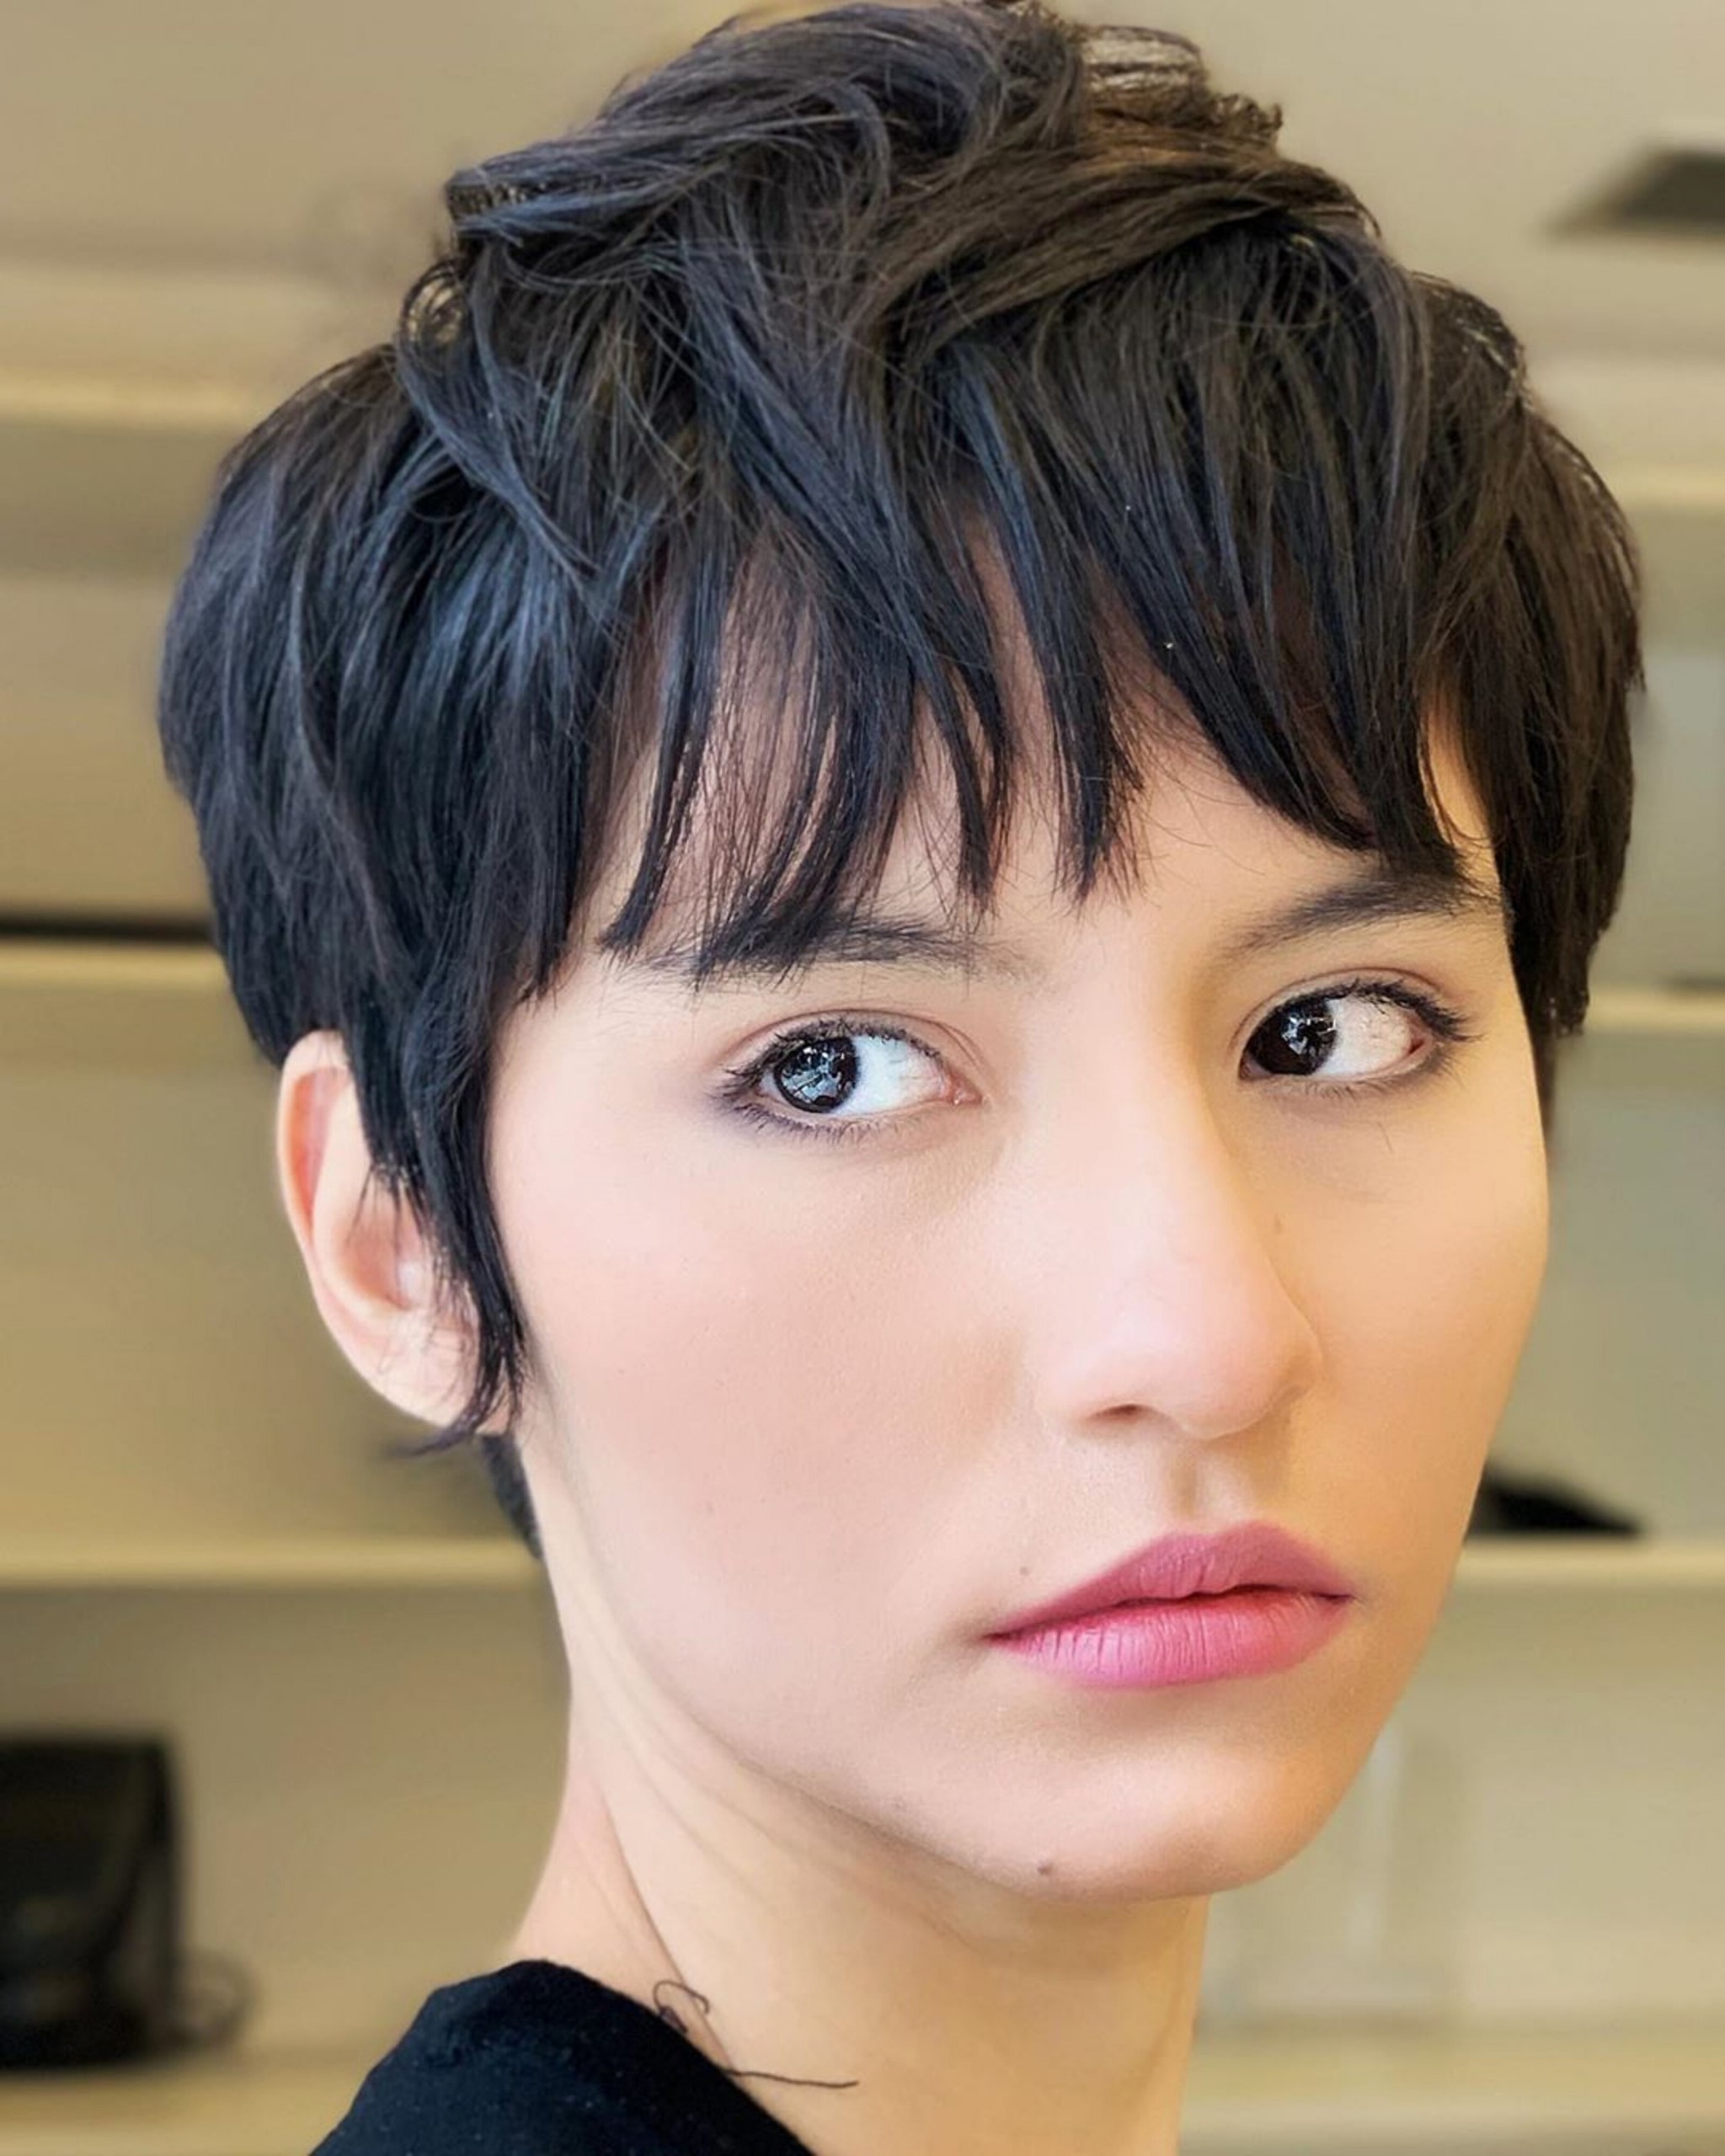 48 Short Pixie Hairstyle Ideas For Young Ladies And Mature Women